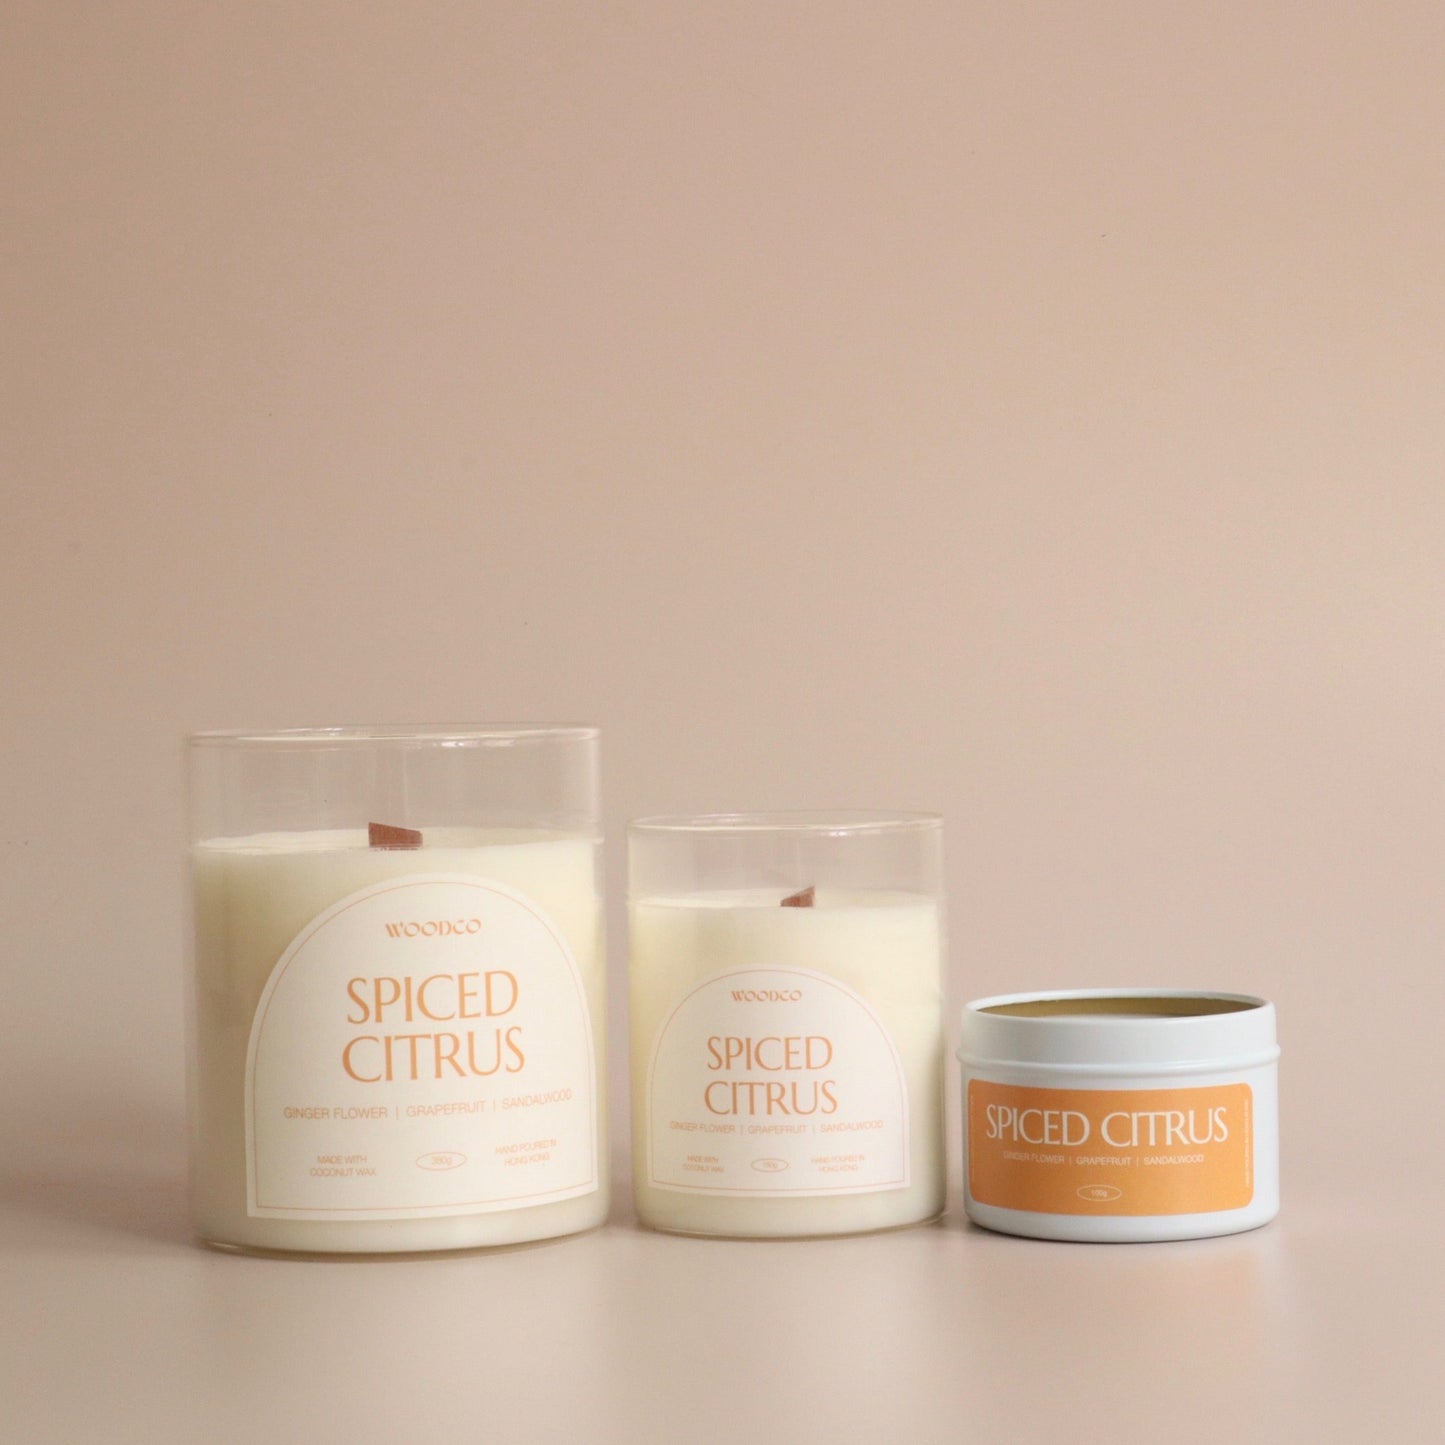 Spiced Citrus scented candle